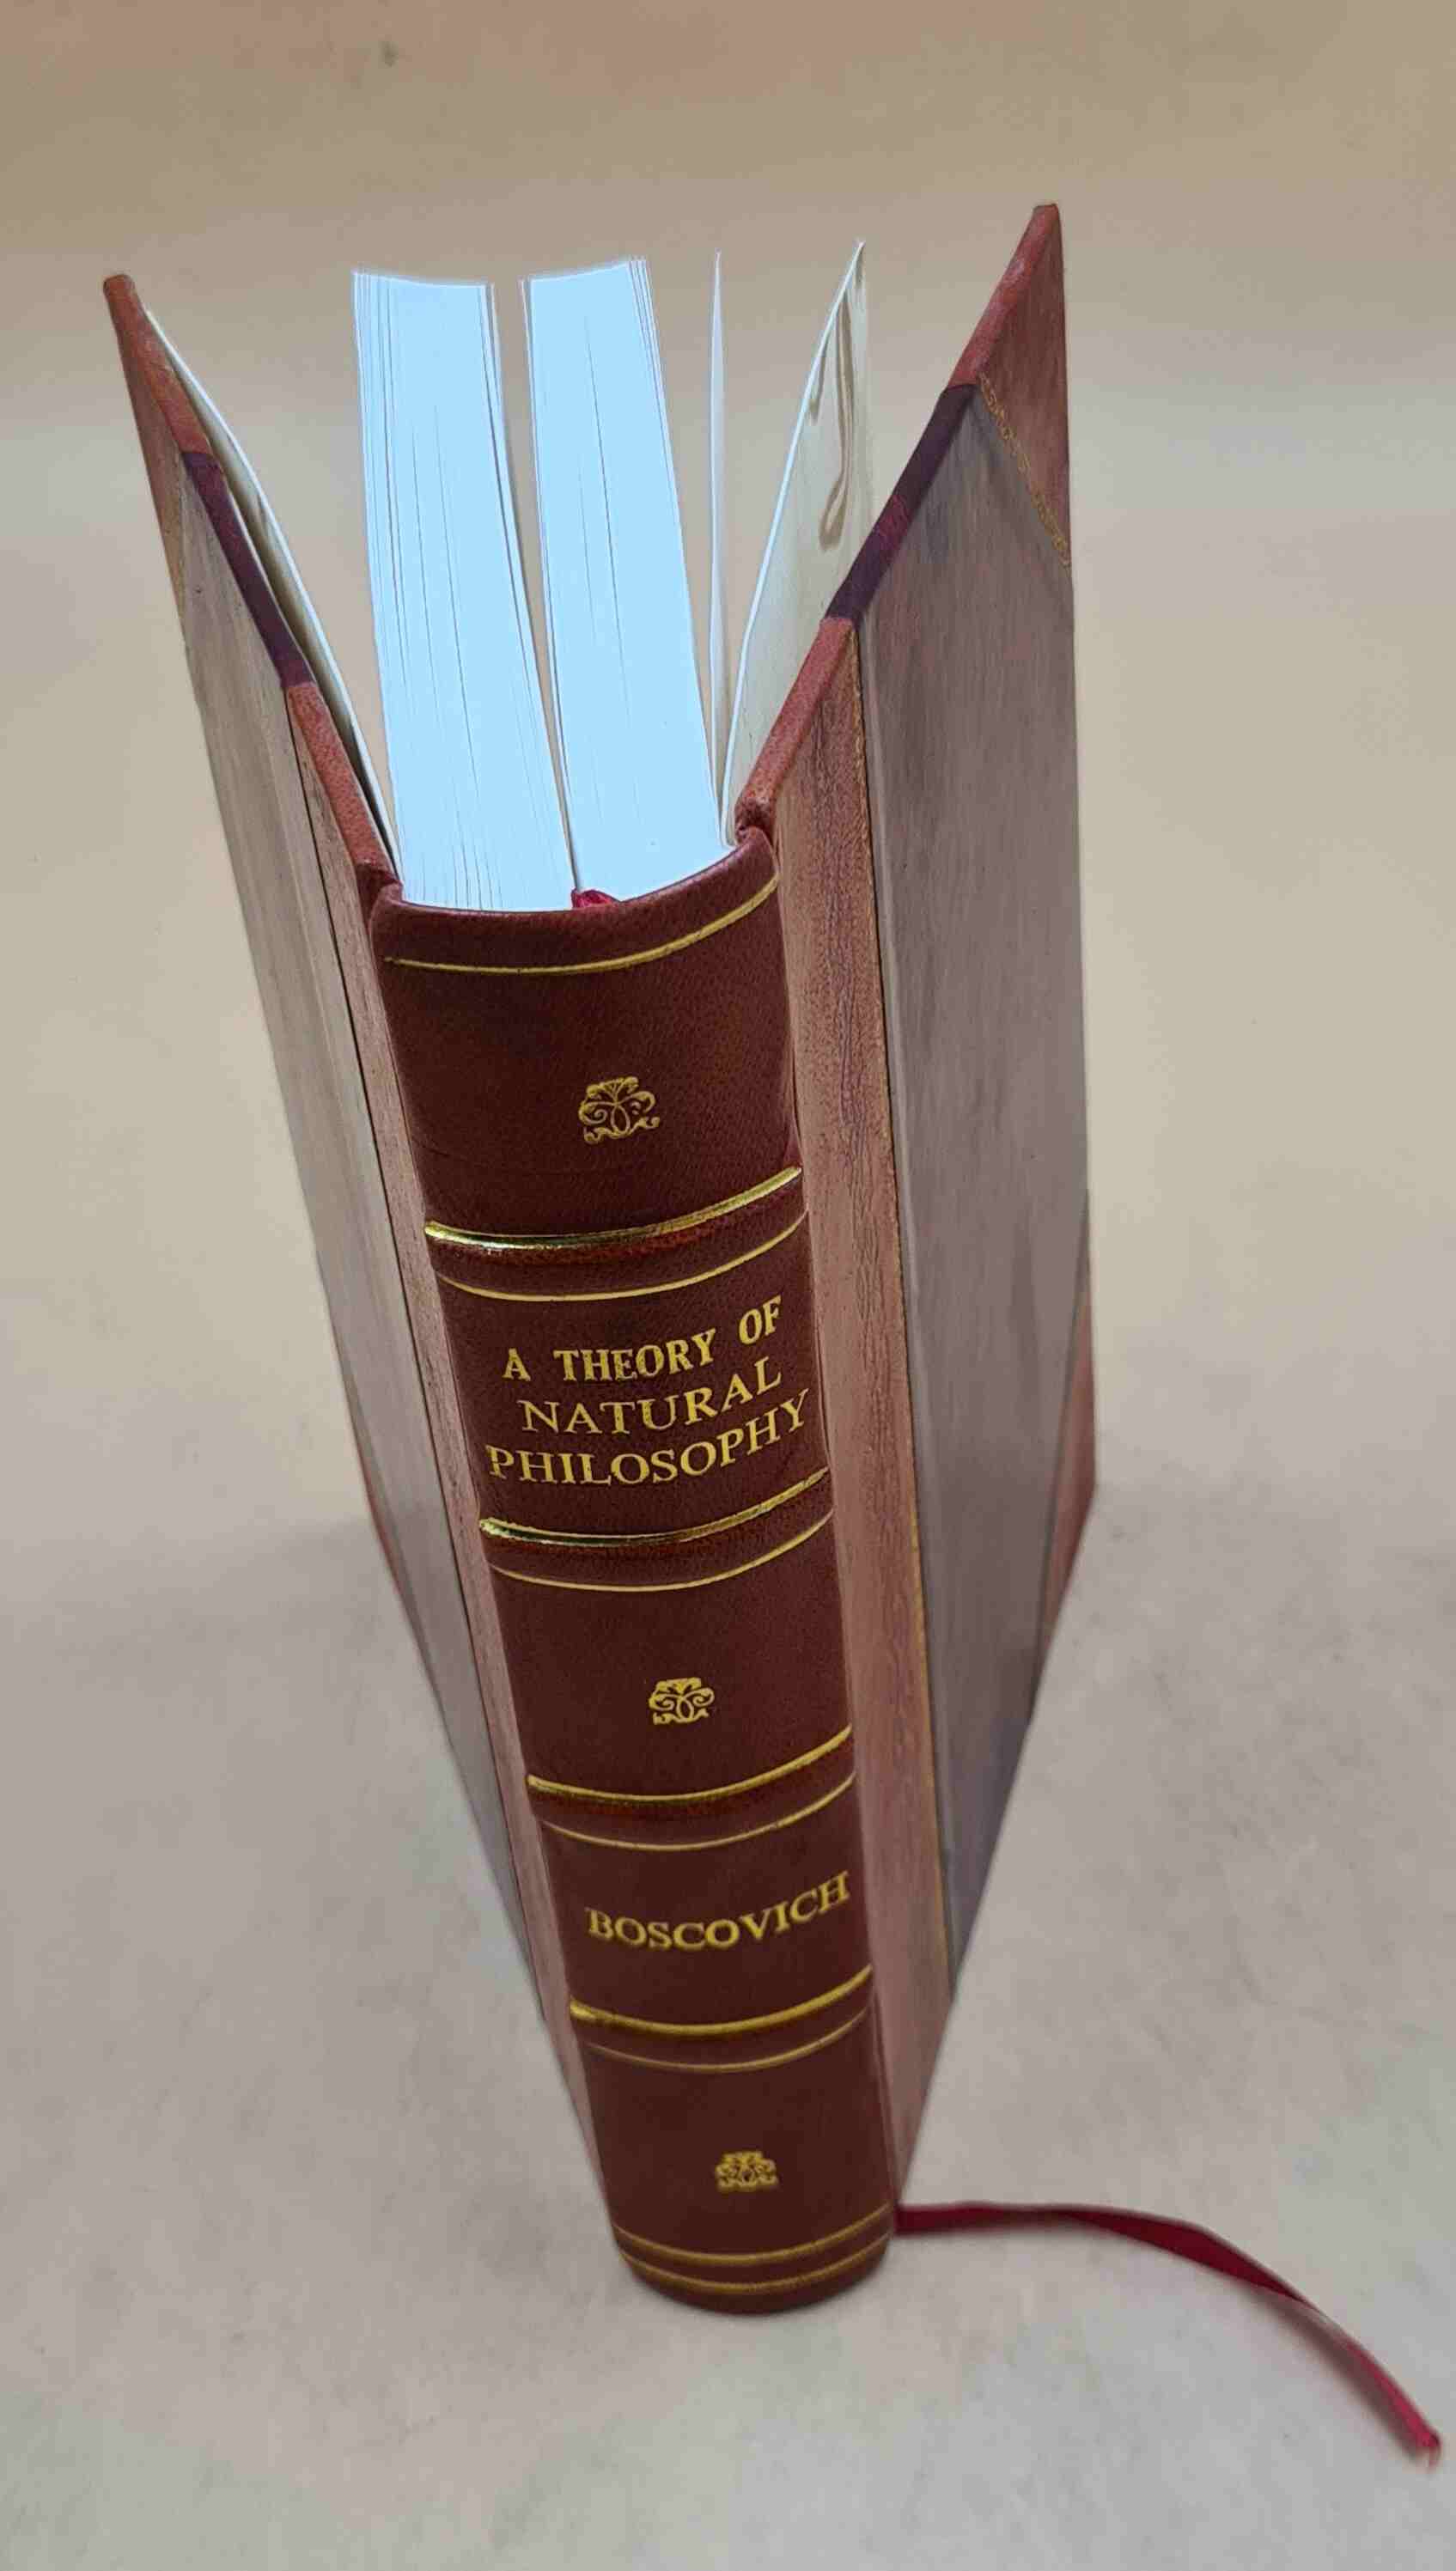 A theory of natural philosophy  put forward and explained by Roger Joseph Boscovich. 1922 [Leather Bound]